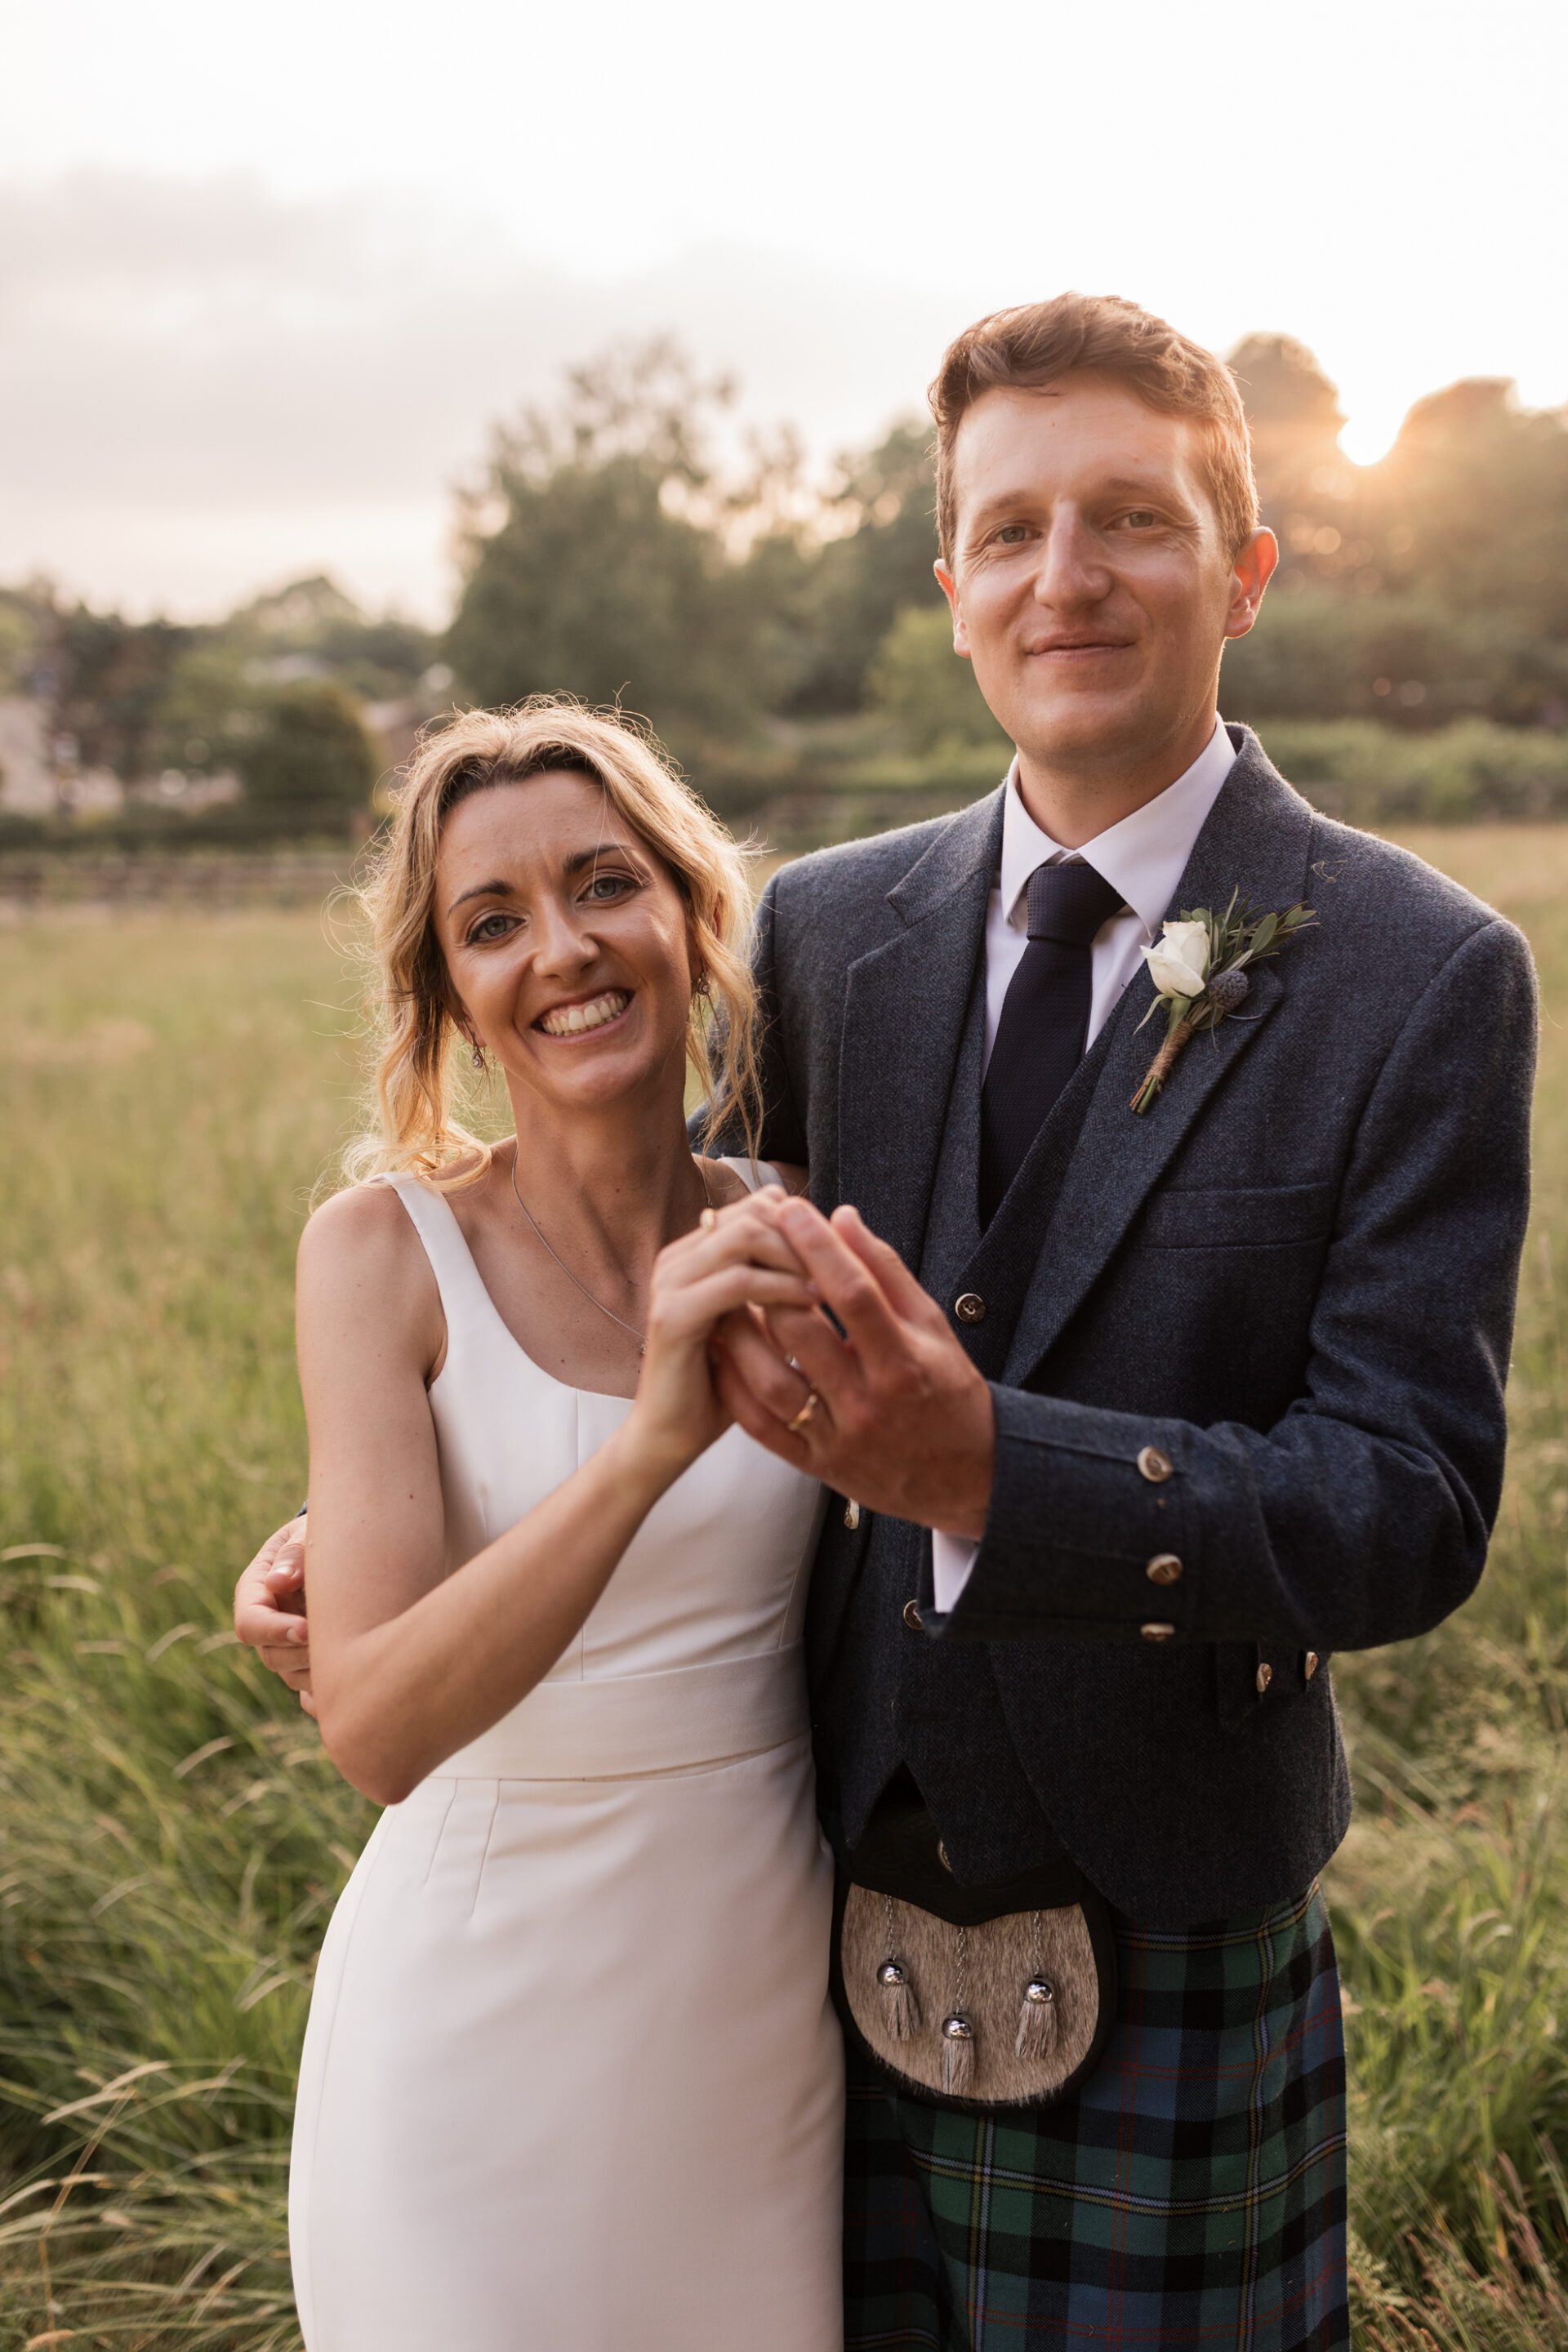 The bride and groom pose for golden hour portraits at their Devon marquee wedding